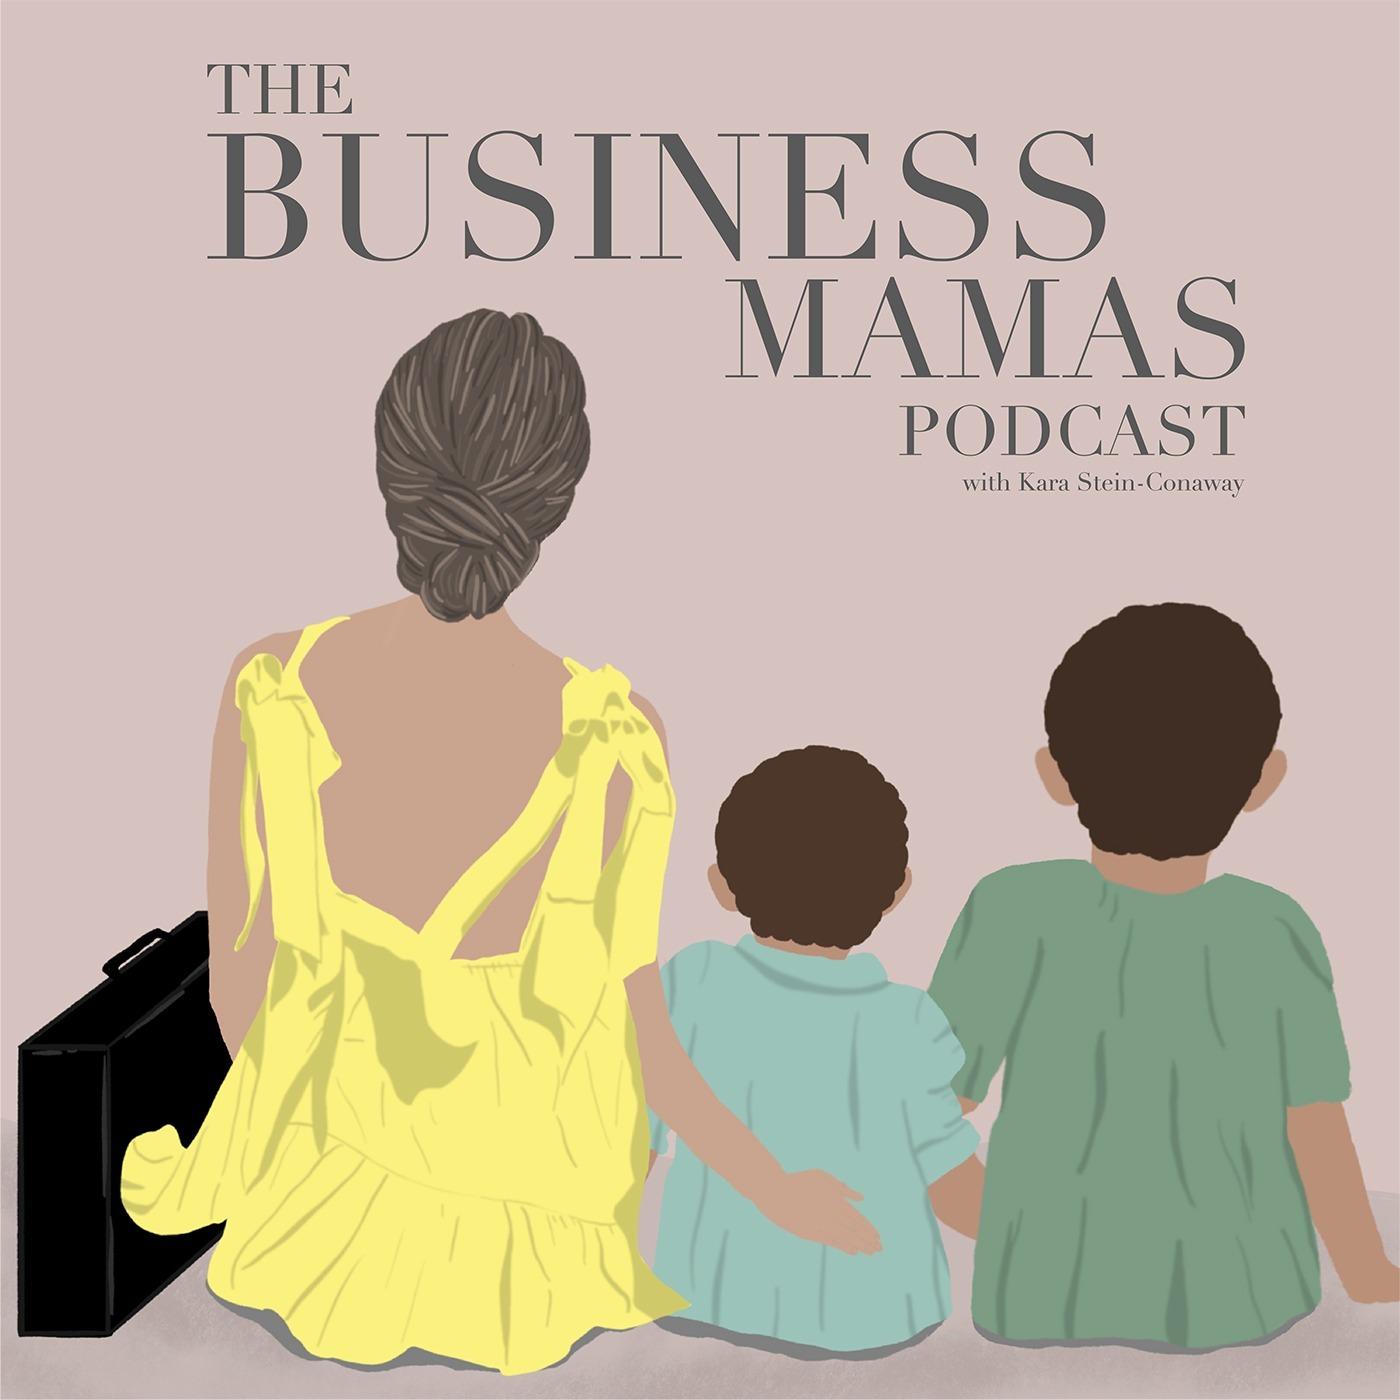 The Business Mamas Podcast